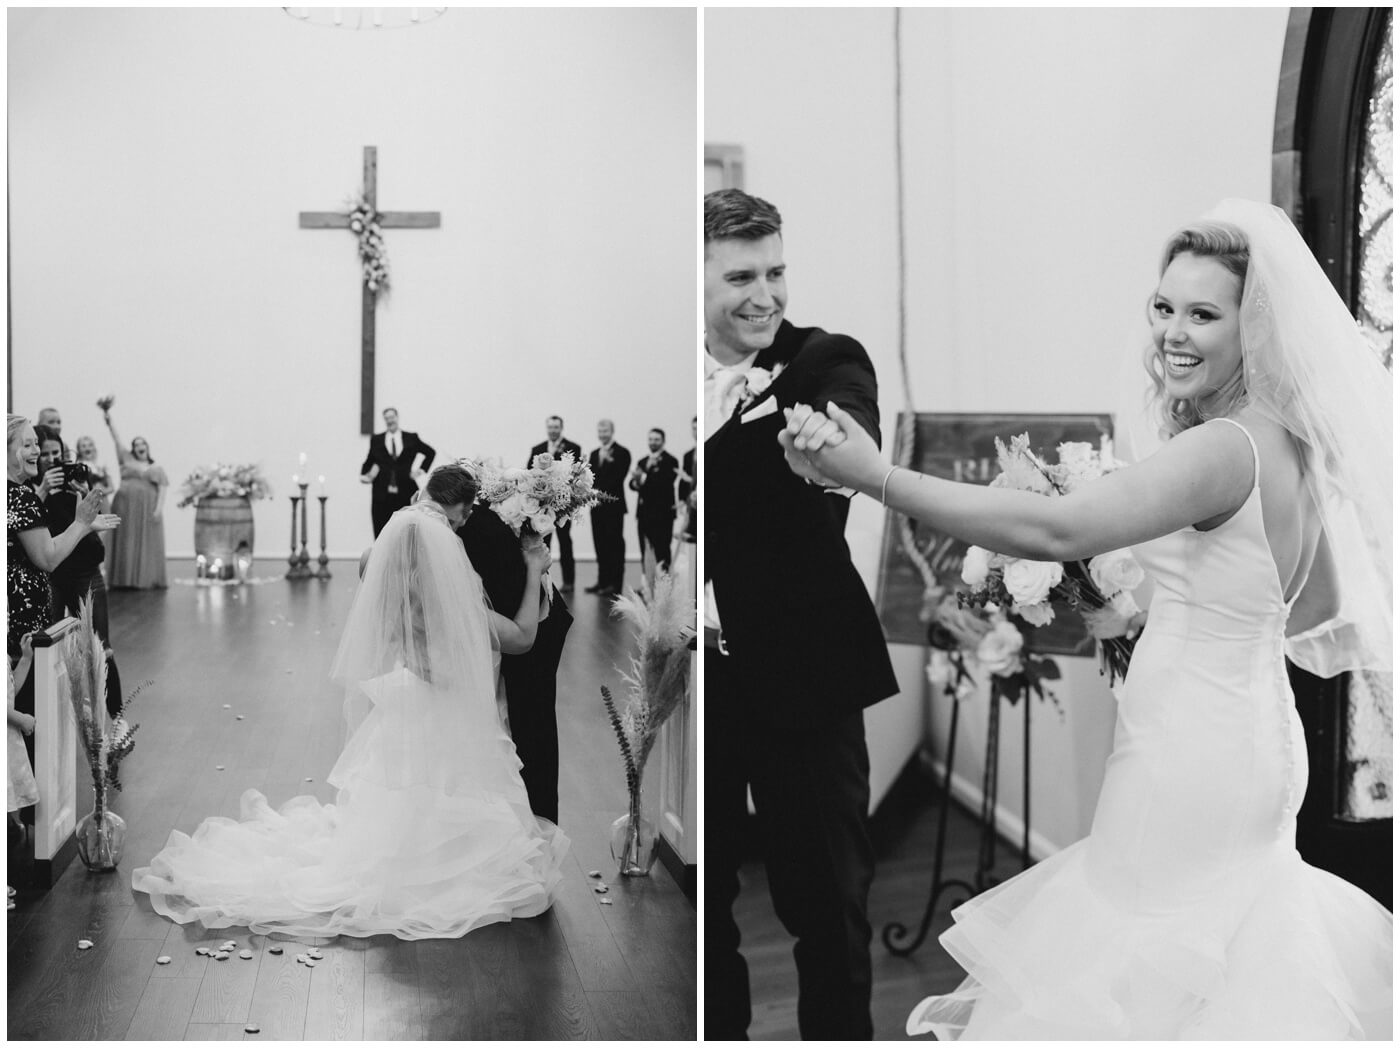 Houston Wedding at The Vine | the bride and groom kiss as they walk down the aisle